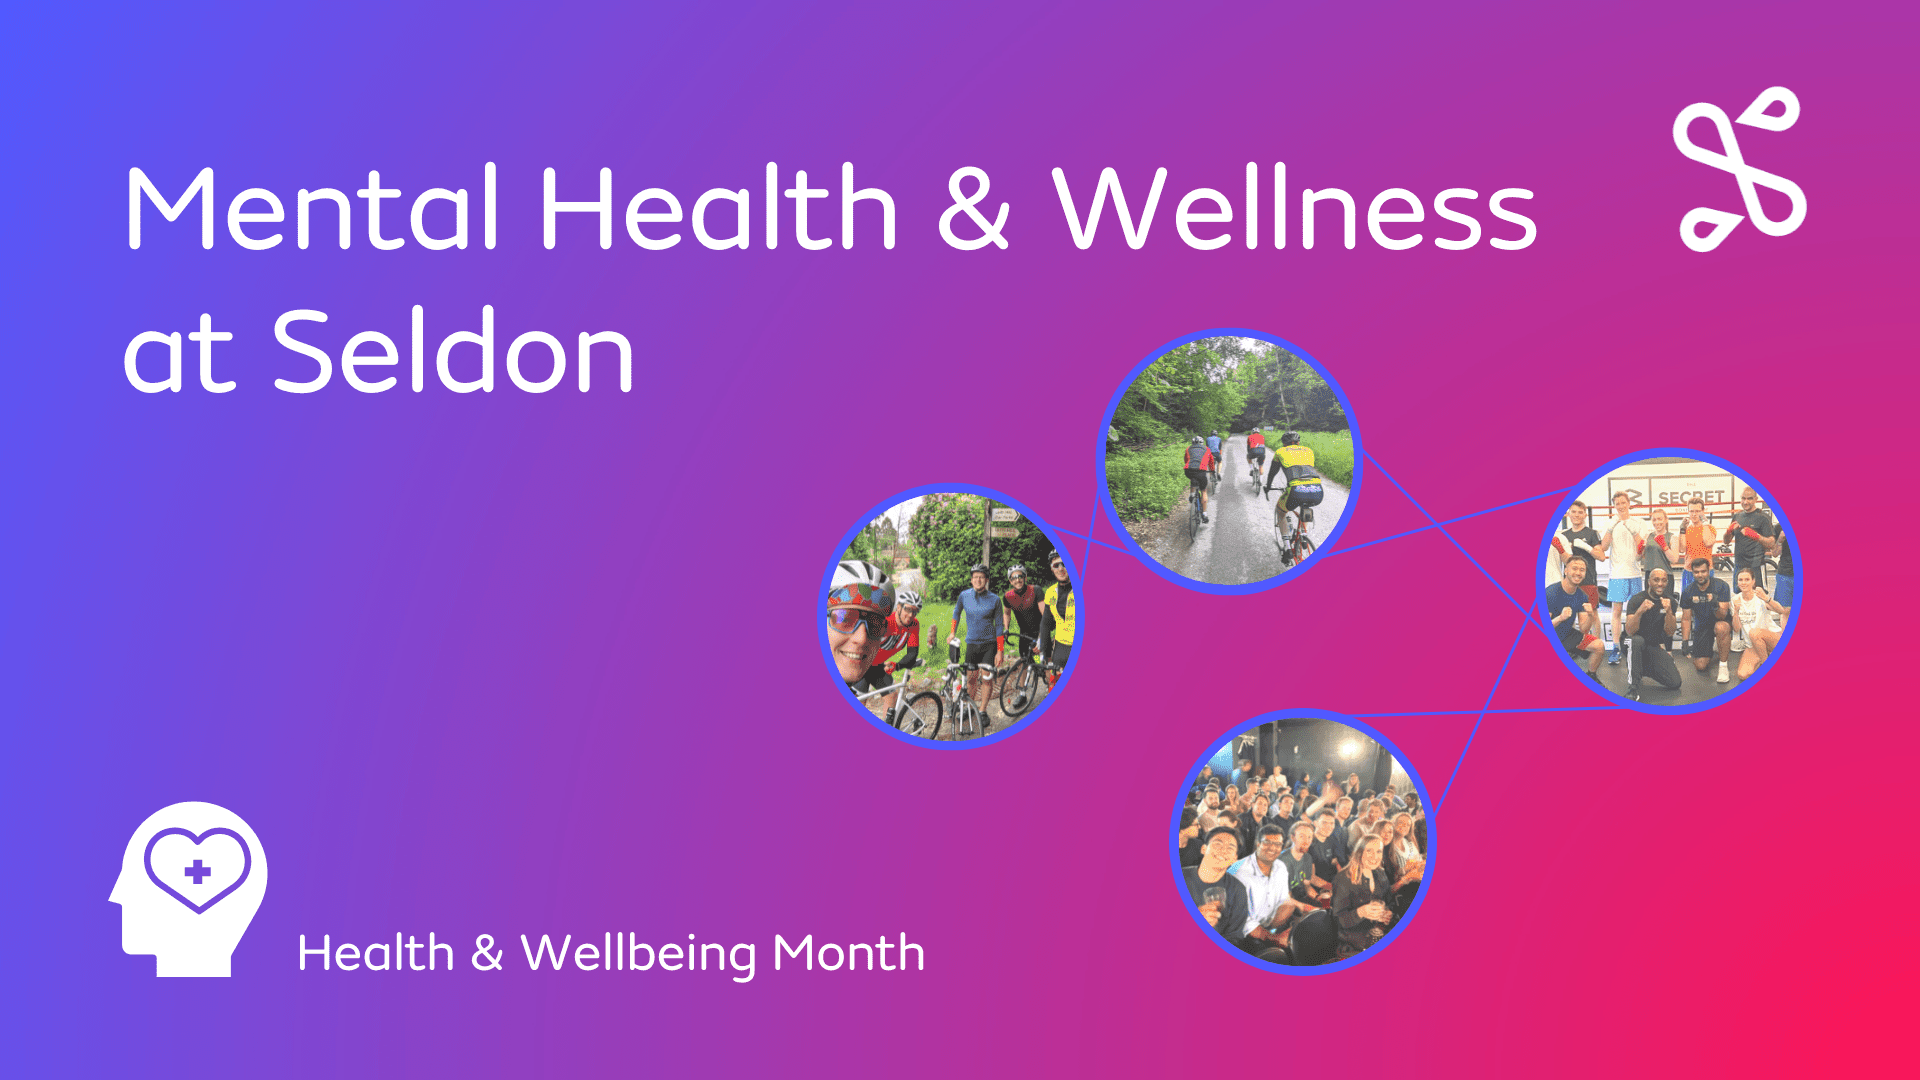 Health & Wellbeing Month and Mental Health Awareness Week at Seldon